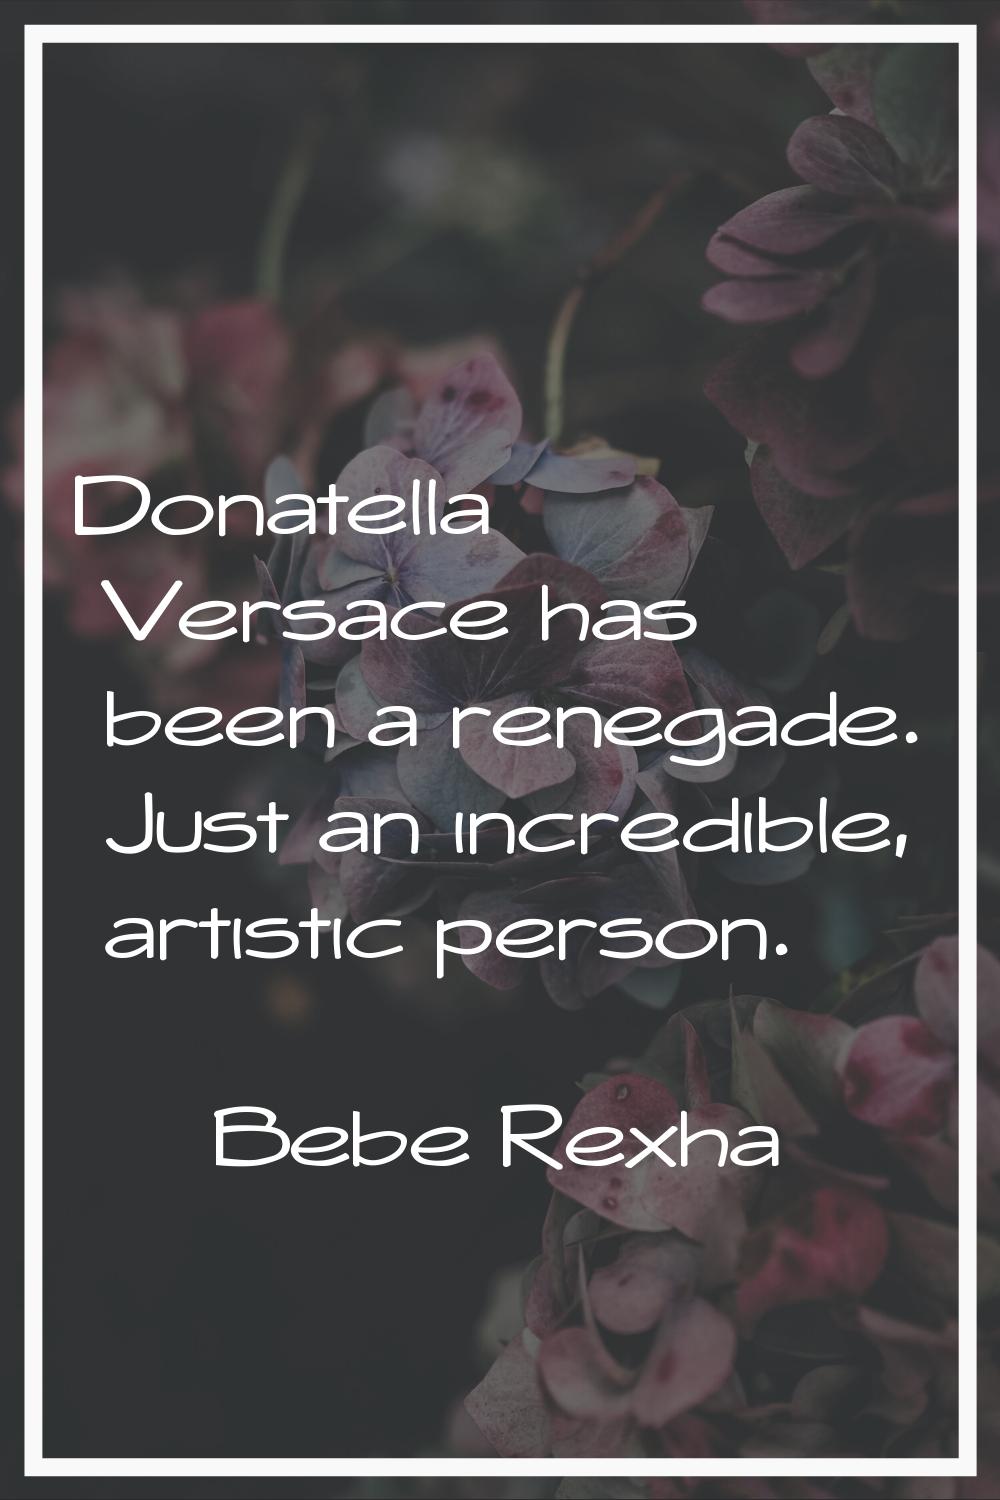 Donatella Versace has been a renegade. Just an incredible, artistic person.